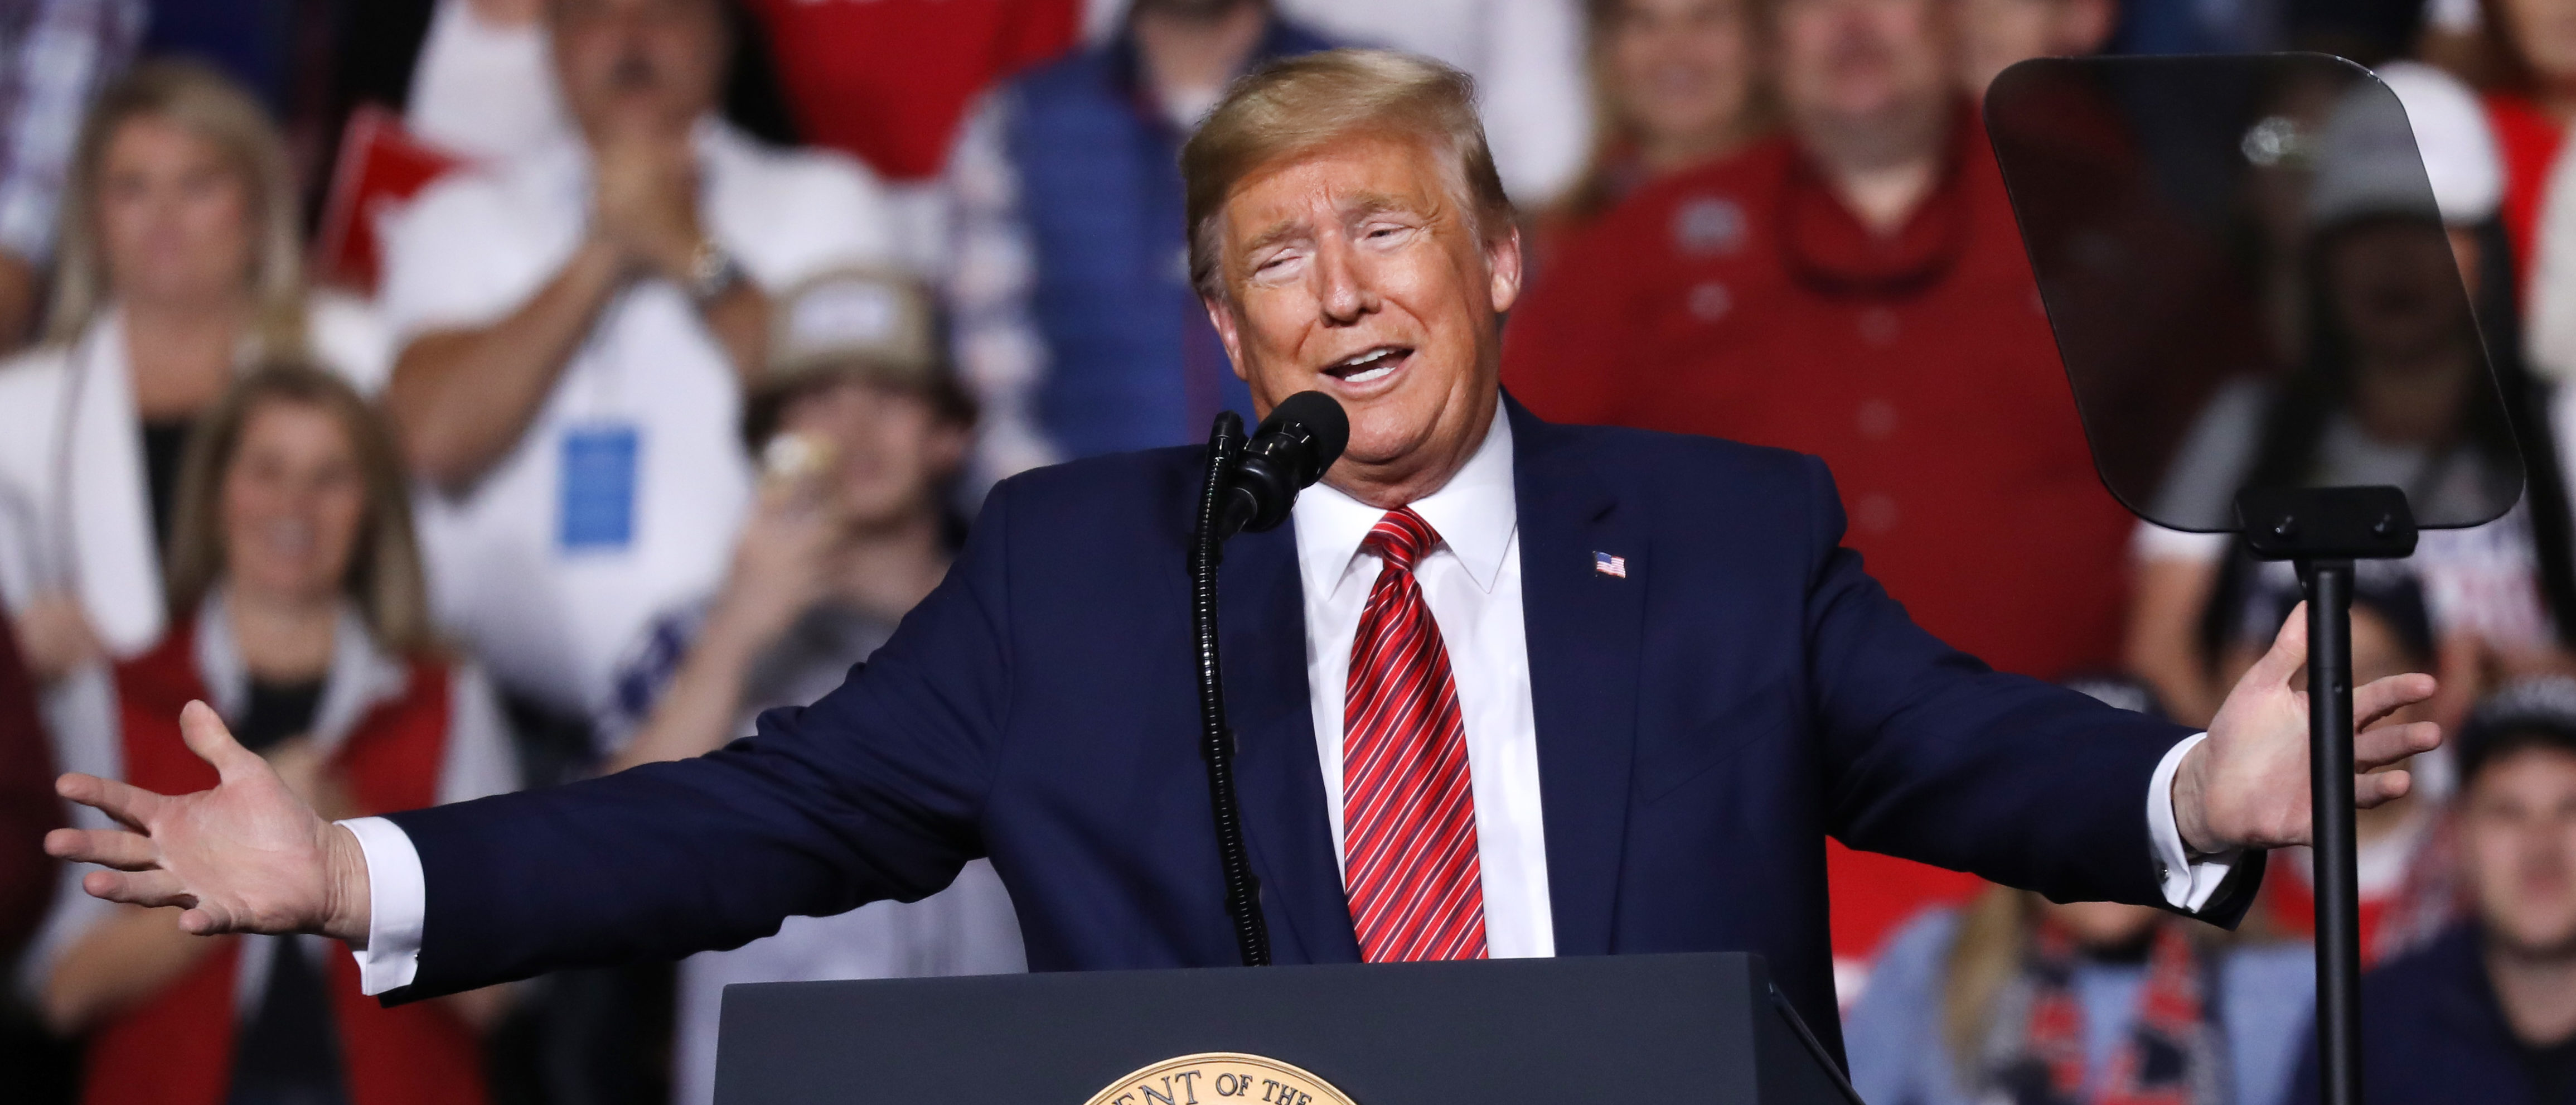 President Donald Trump appears at a rally on the eve of the South Carolina primary on February 28, 2020 in North Charleston, South Carolina. (Spencer Platt/Getty Images)